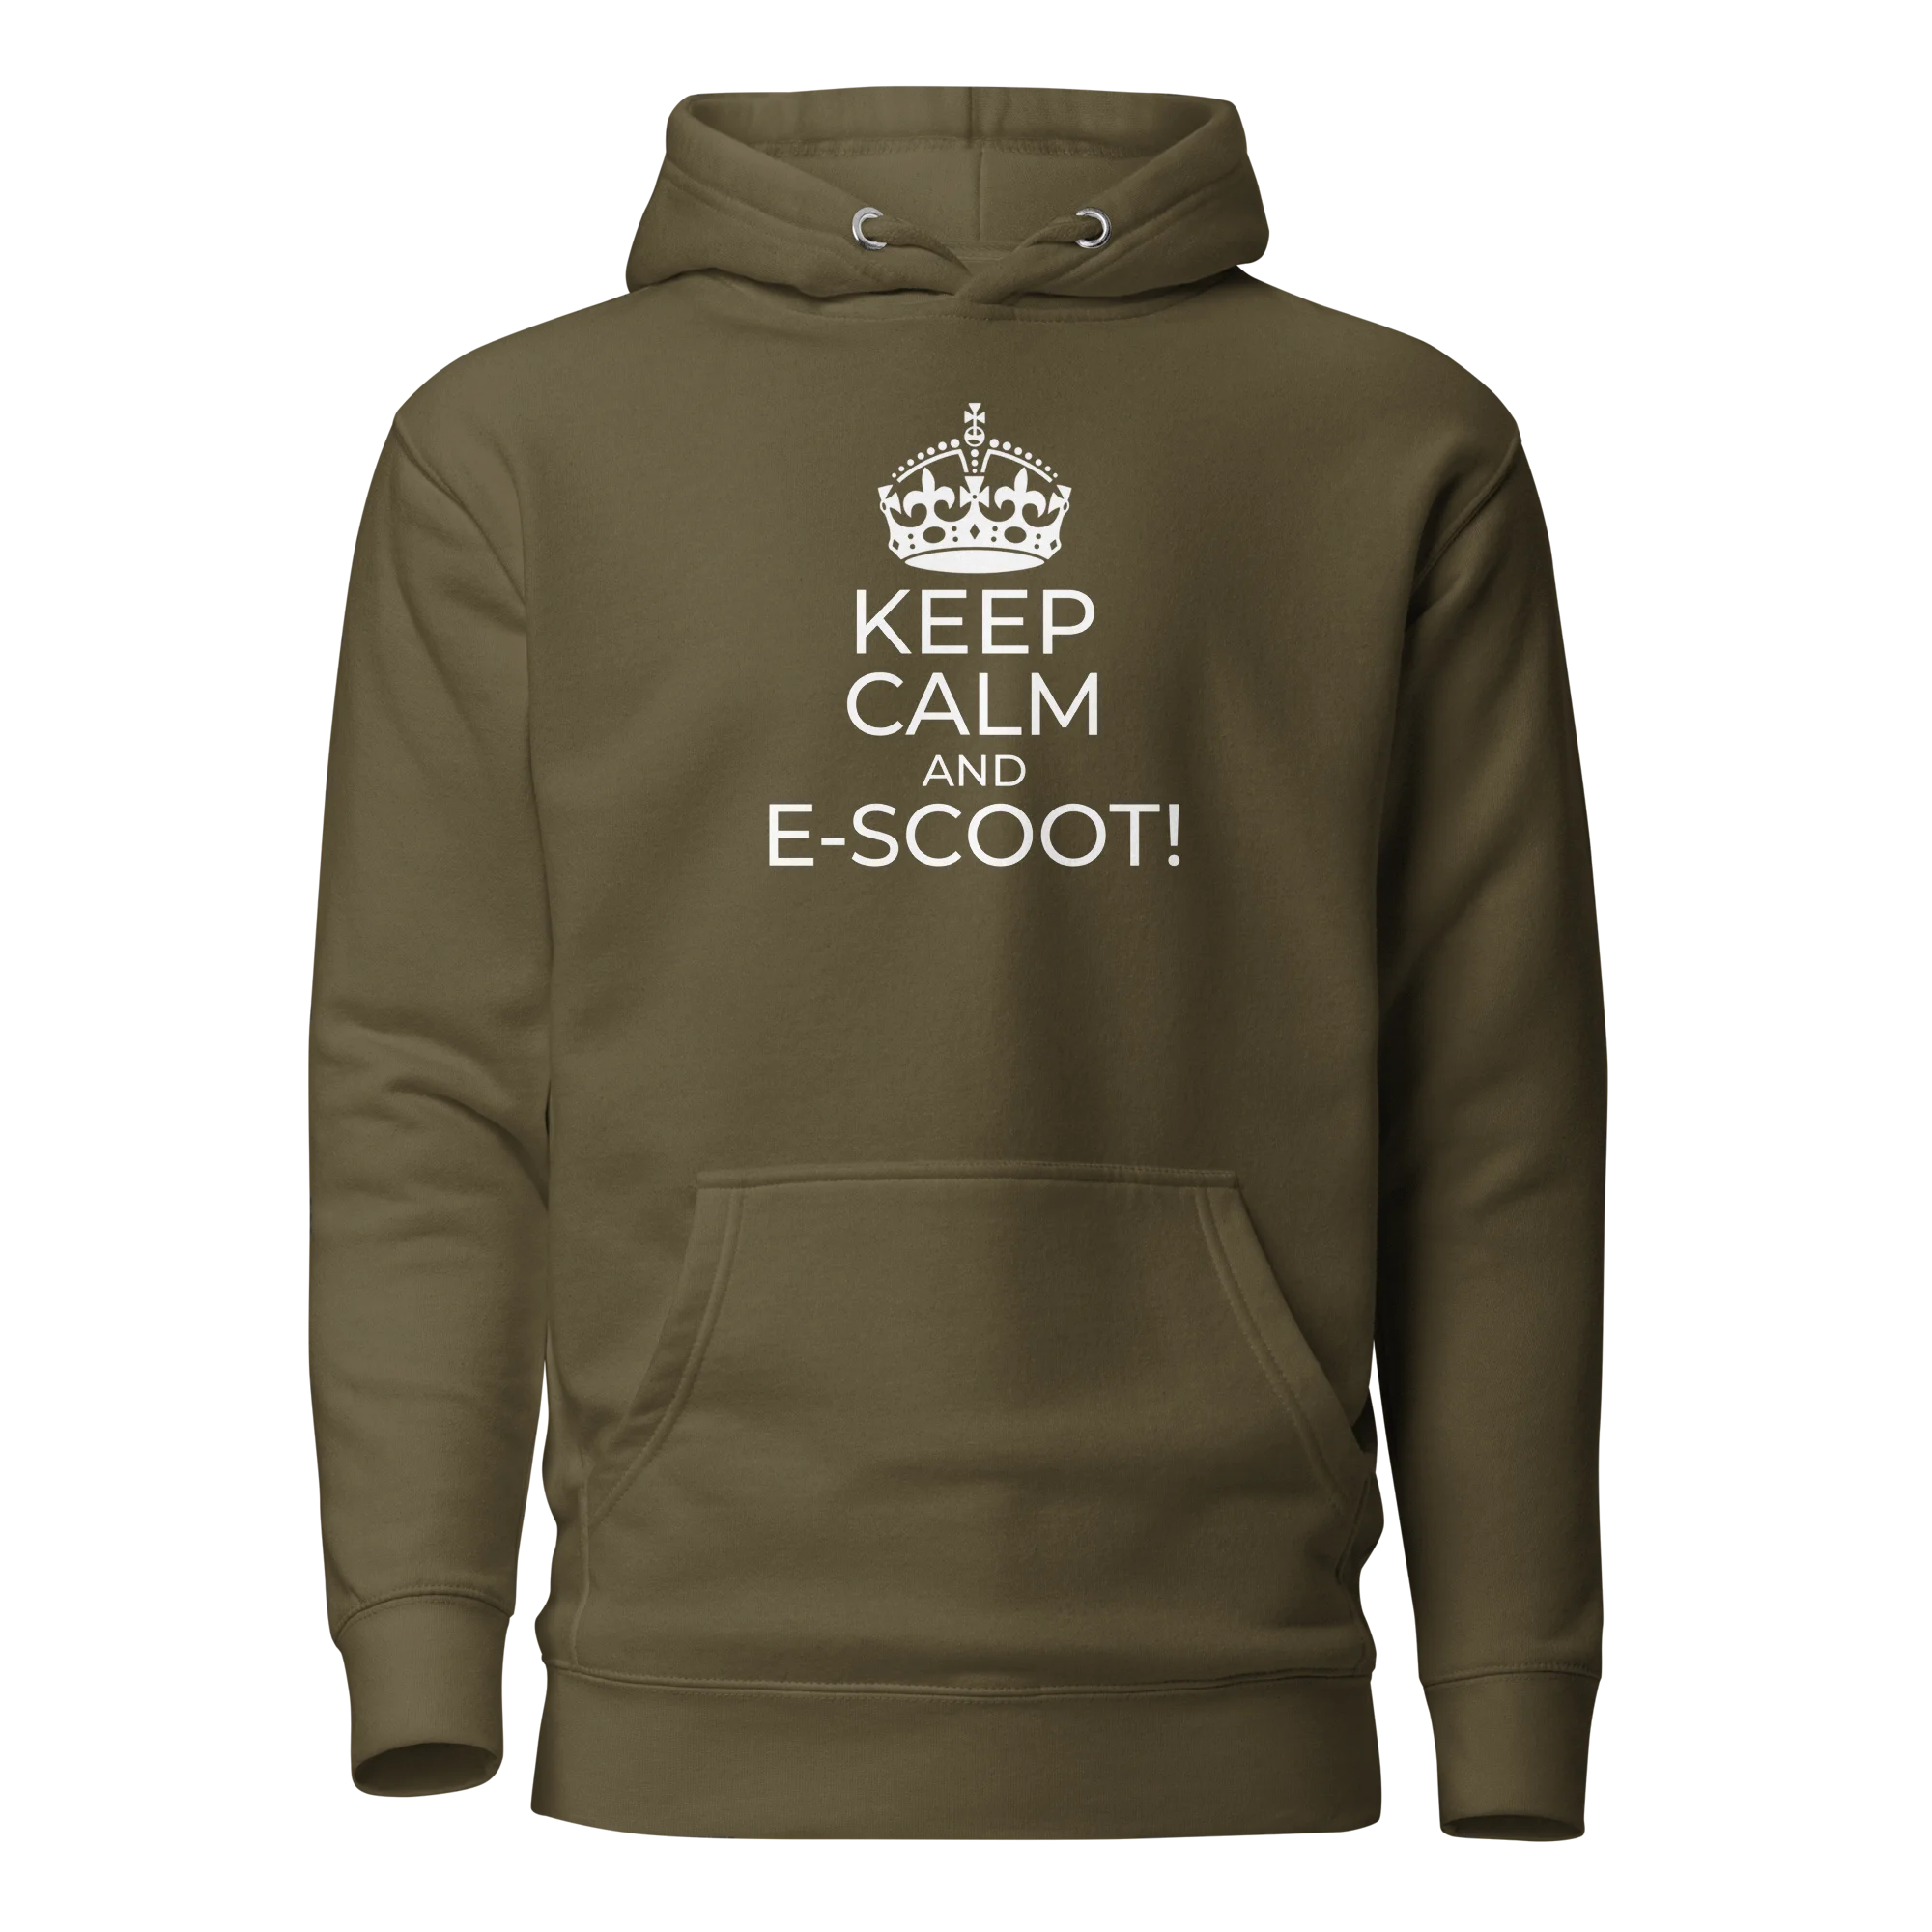 E-Scooter Graphic Hoodie: Keep Calm And E-Scoot (Military Green)